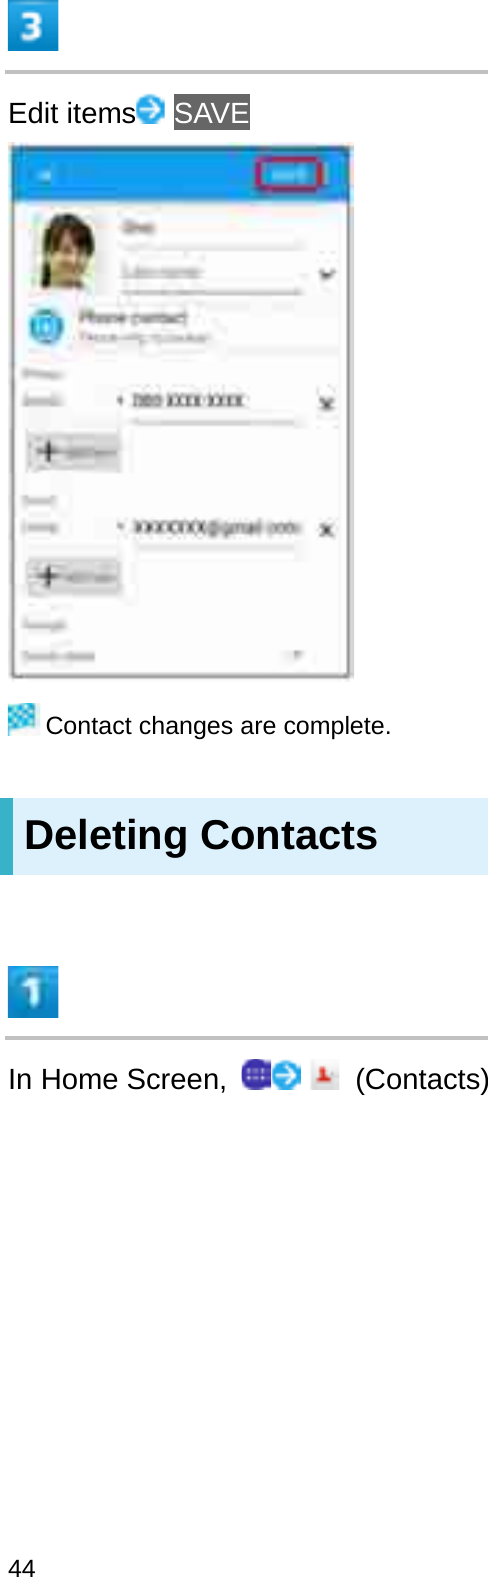 Edit items SAVEContact changes are complete.Deleting ContactsIn Home Screen,  (Contacts)44